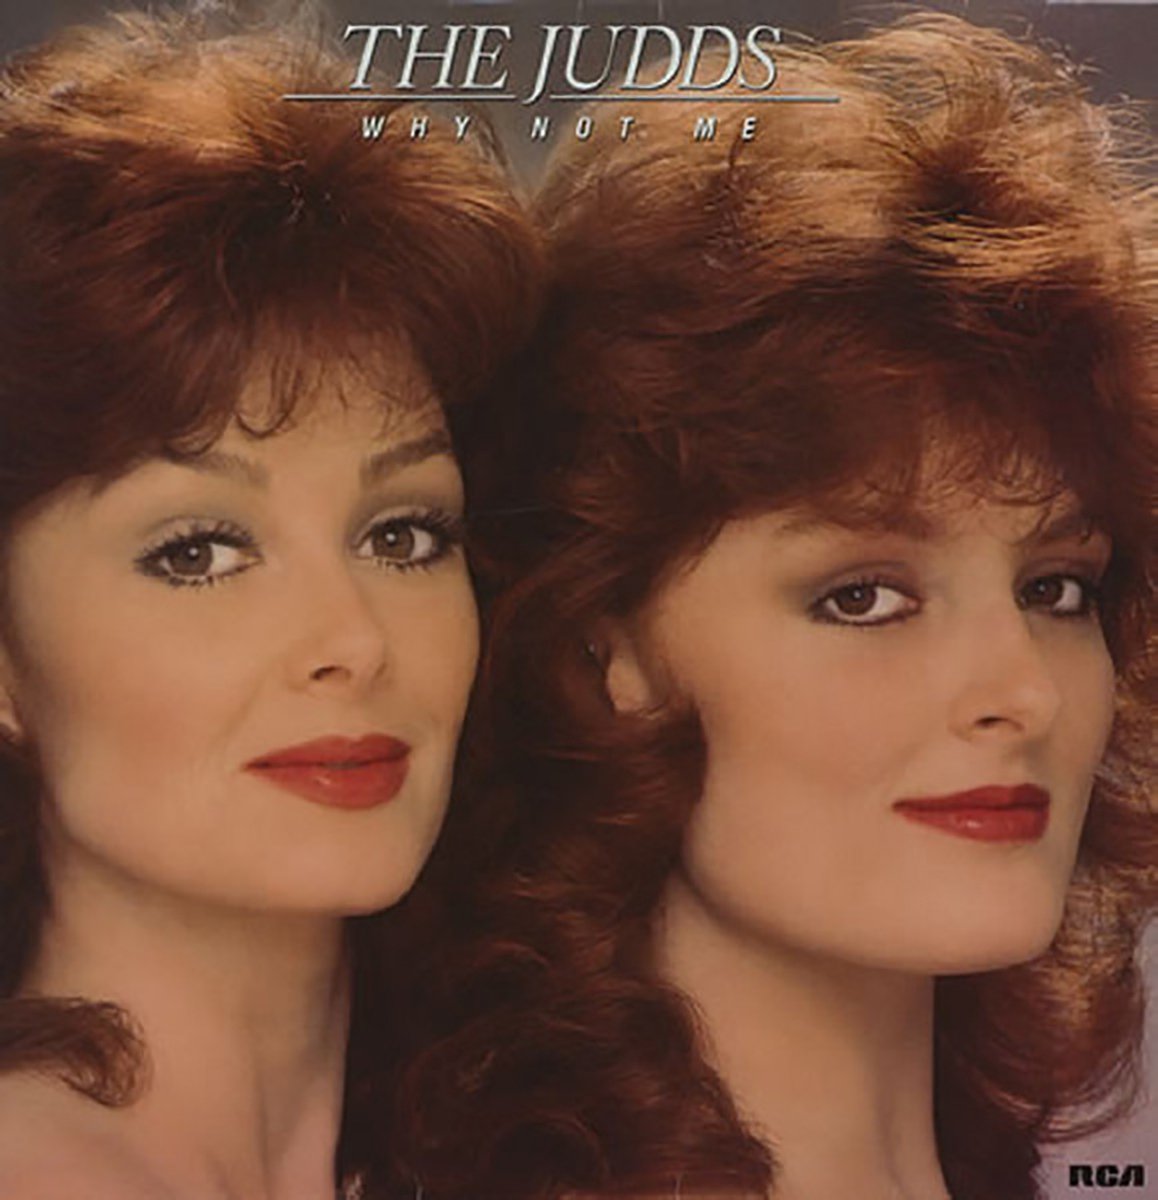 THE JUDDS - Why not me - The Judds